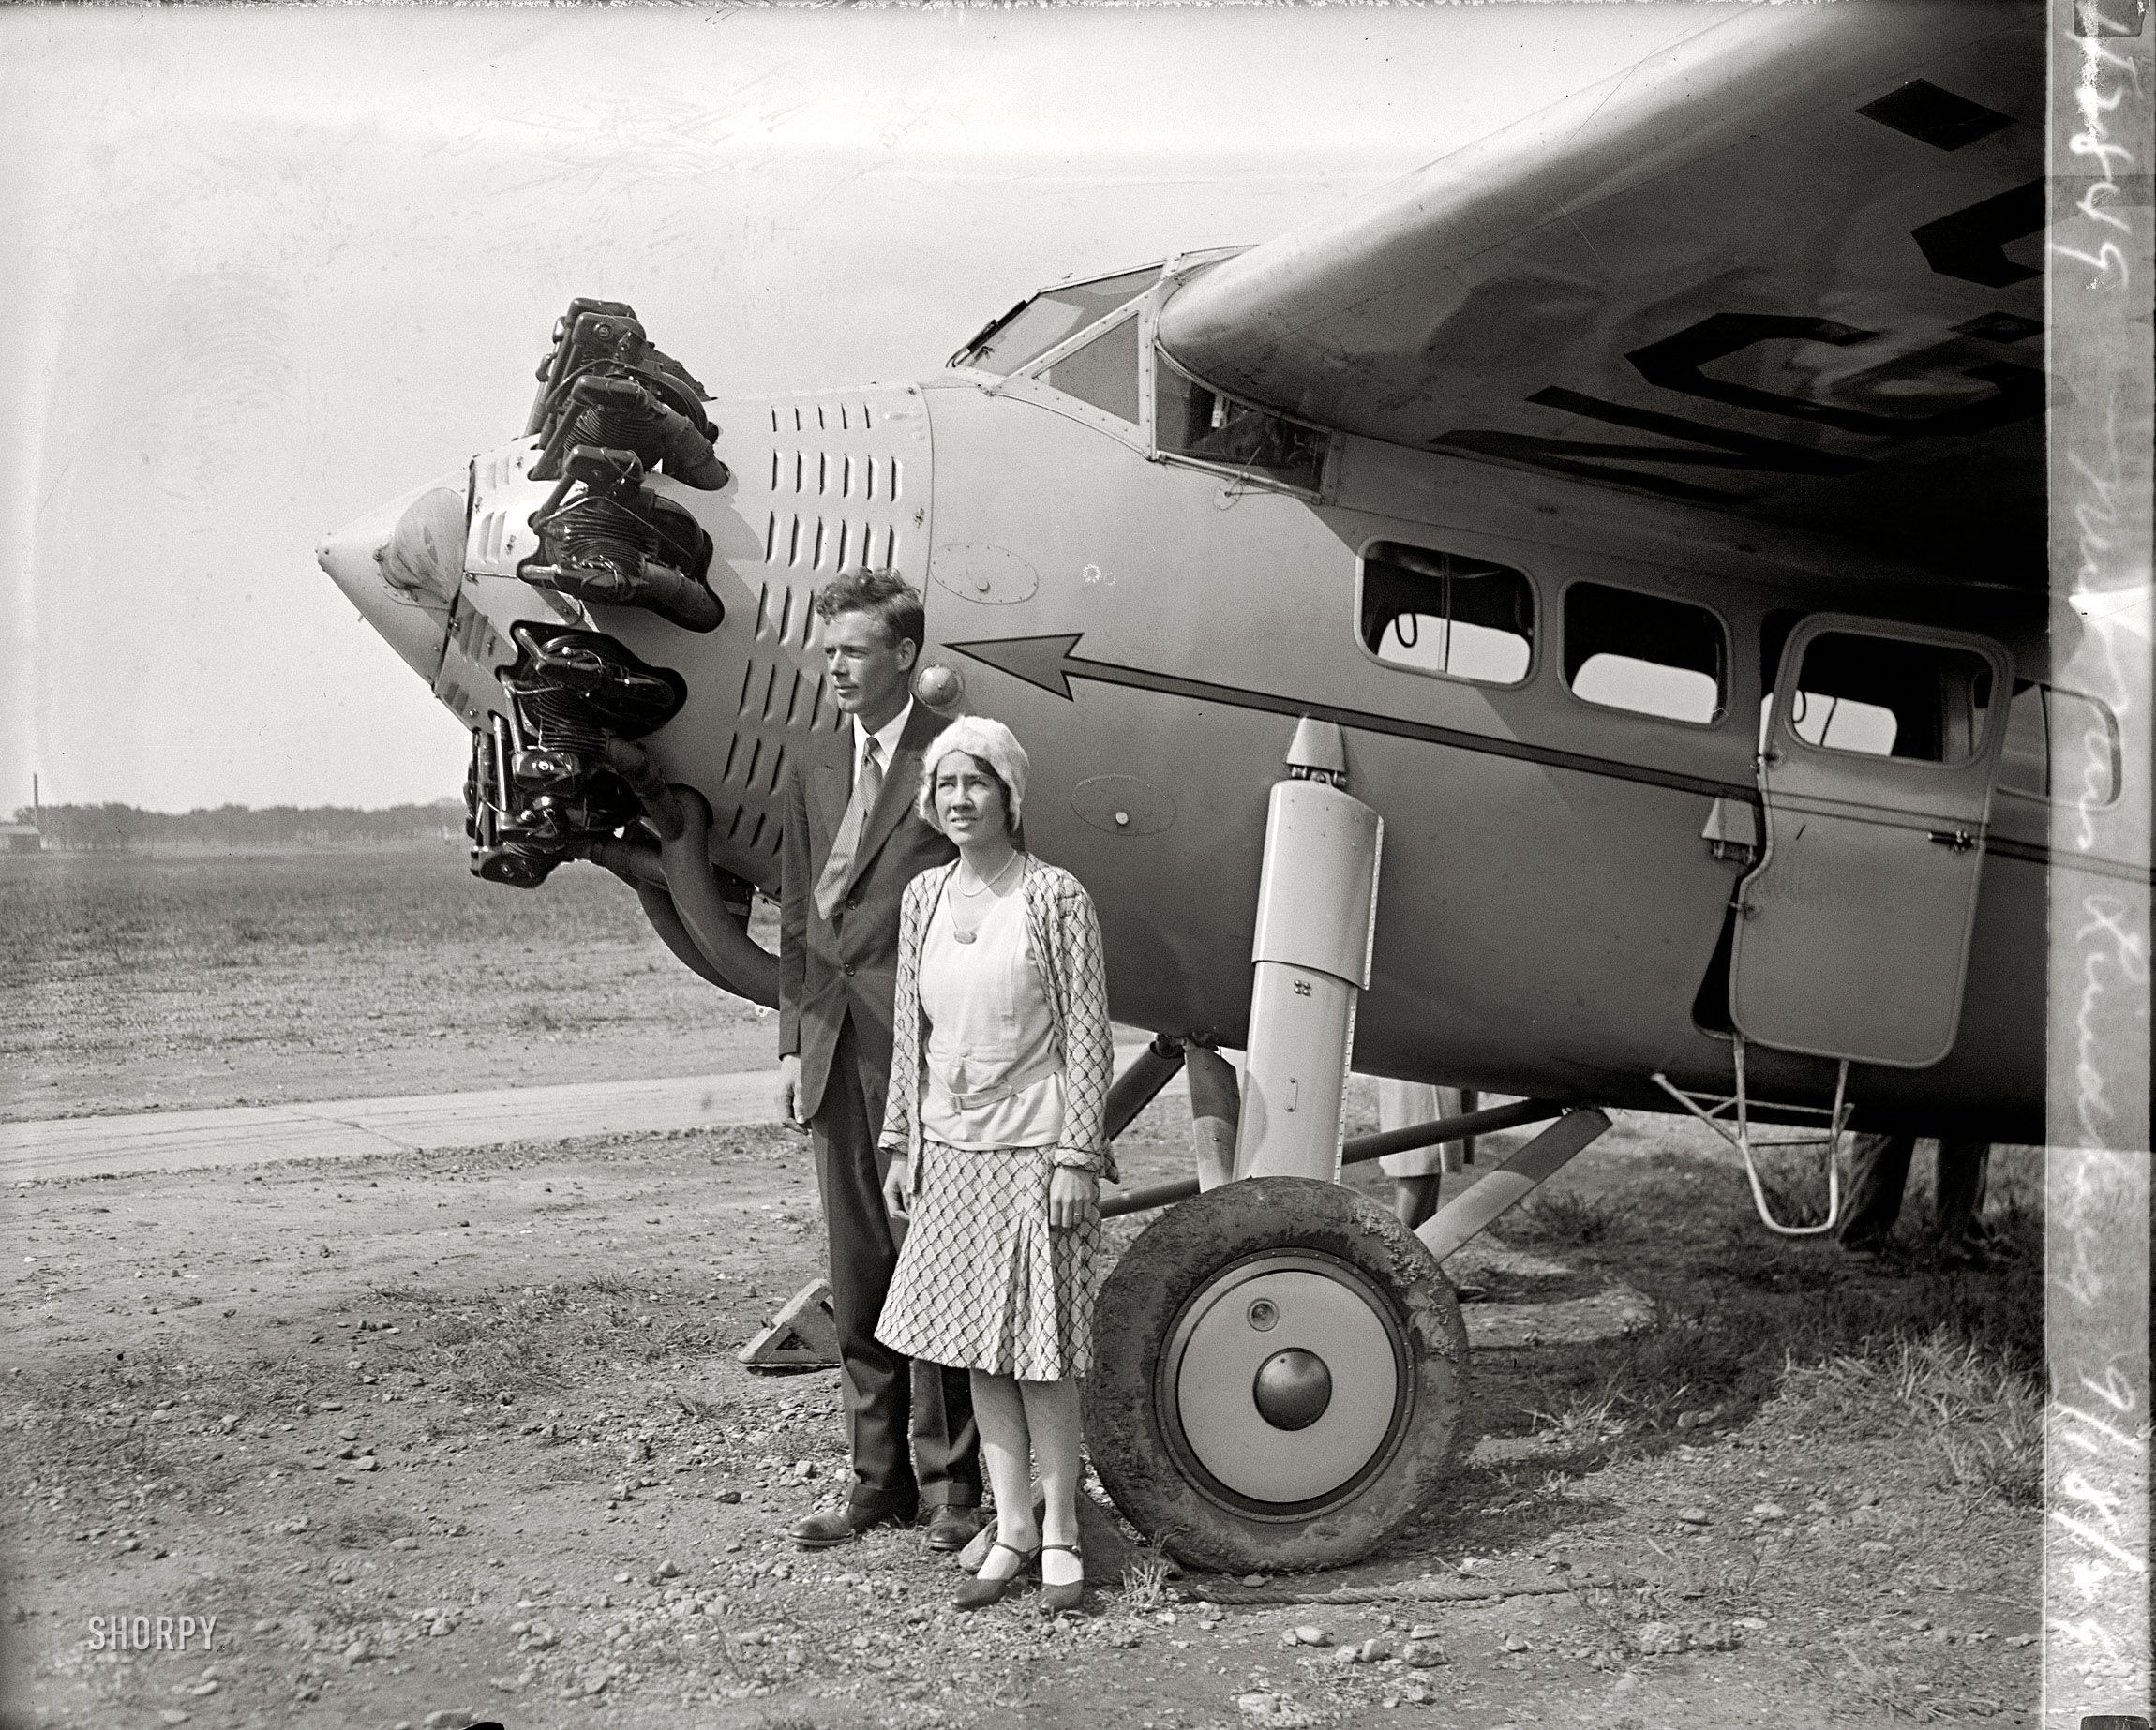 September 18, 1929. "Mr. & Mrs. Lindbergh." Aviator Charles Lindbergh and Anne Morrow Lindbergh, four months after they married, at Bolling Field en route to South America. Charles, the pioneering aviator, was probably the most famous person in America at the time; Anne would become an accomplished aviator in her own right, as well as one of the best-selling writers of the 20th century. Some three years after this picture was taken, the tragedy of their child's murder helped define the modern phenomenon of mass-media super-celebrity. From Anne's 2001 obituary in the New York Times: "Nothing, not even Lindbergh's 1927 landing in Paris, had prepared them for the carnival of reporters, photographers, con artists, curiosity-seekers, vandals and crazy people who invaded their lives after their baby was kidnapped. Americans would not experience a similar flood of publicity until the O. J. Simpson murder trial of the 1990s." National Photo Company Collection glass negative. View full size.